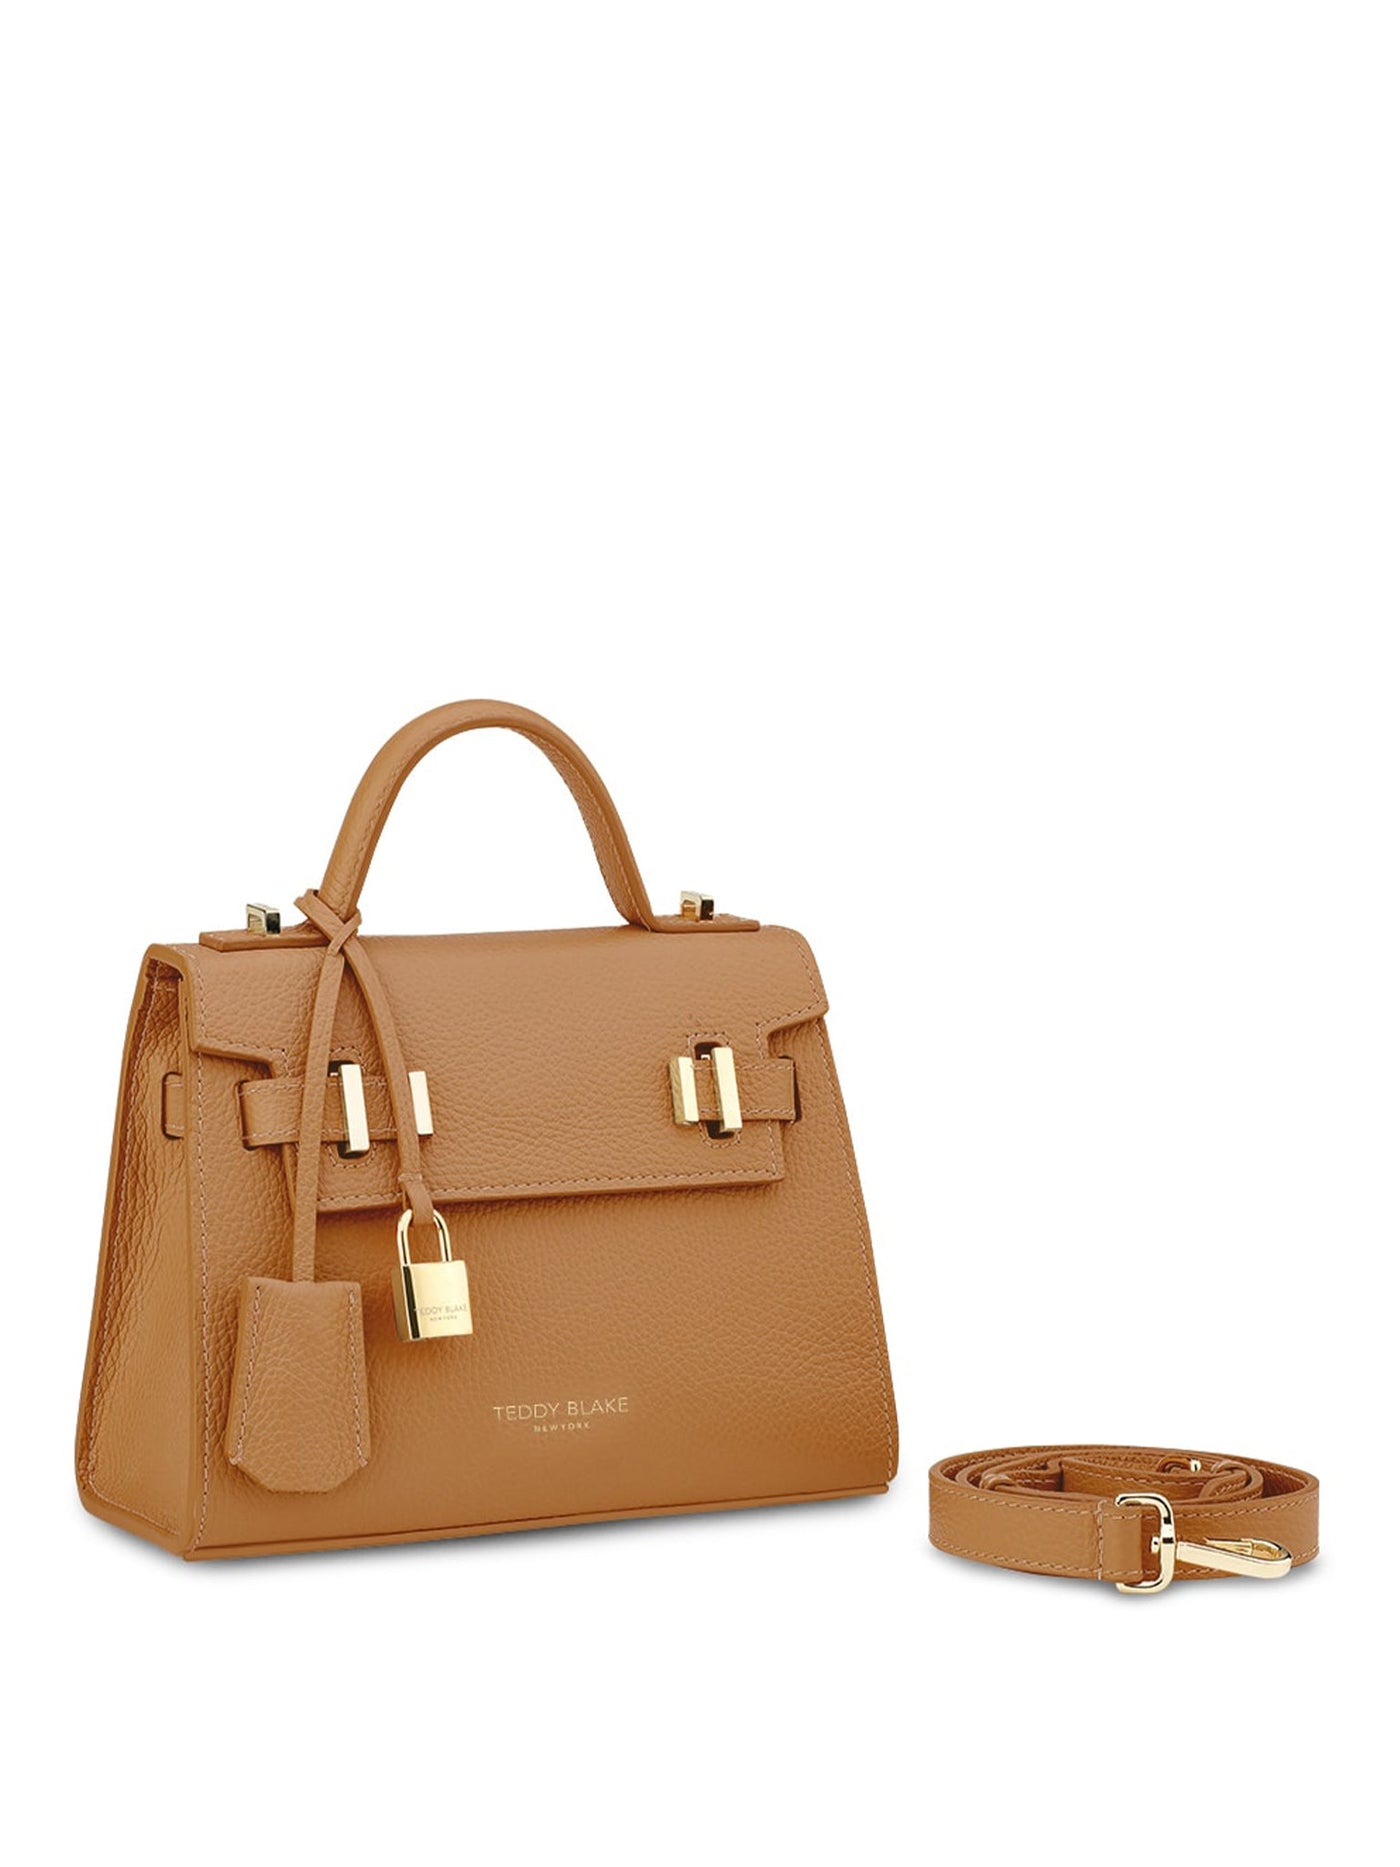 Ava Gold 9 - Camel Brown by Teddy Blake